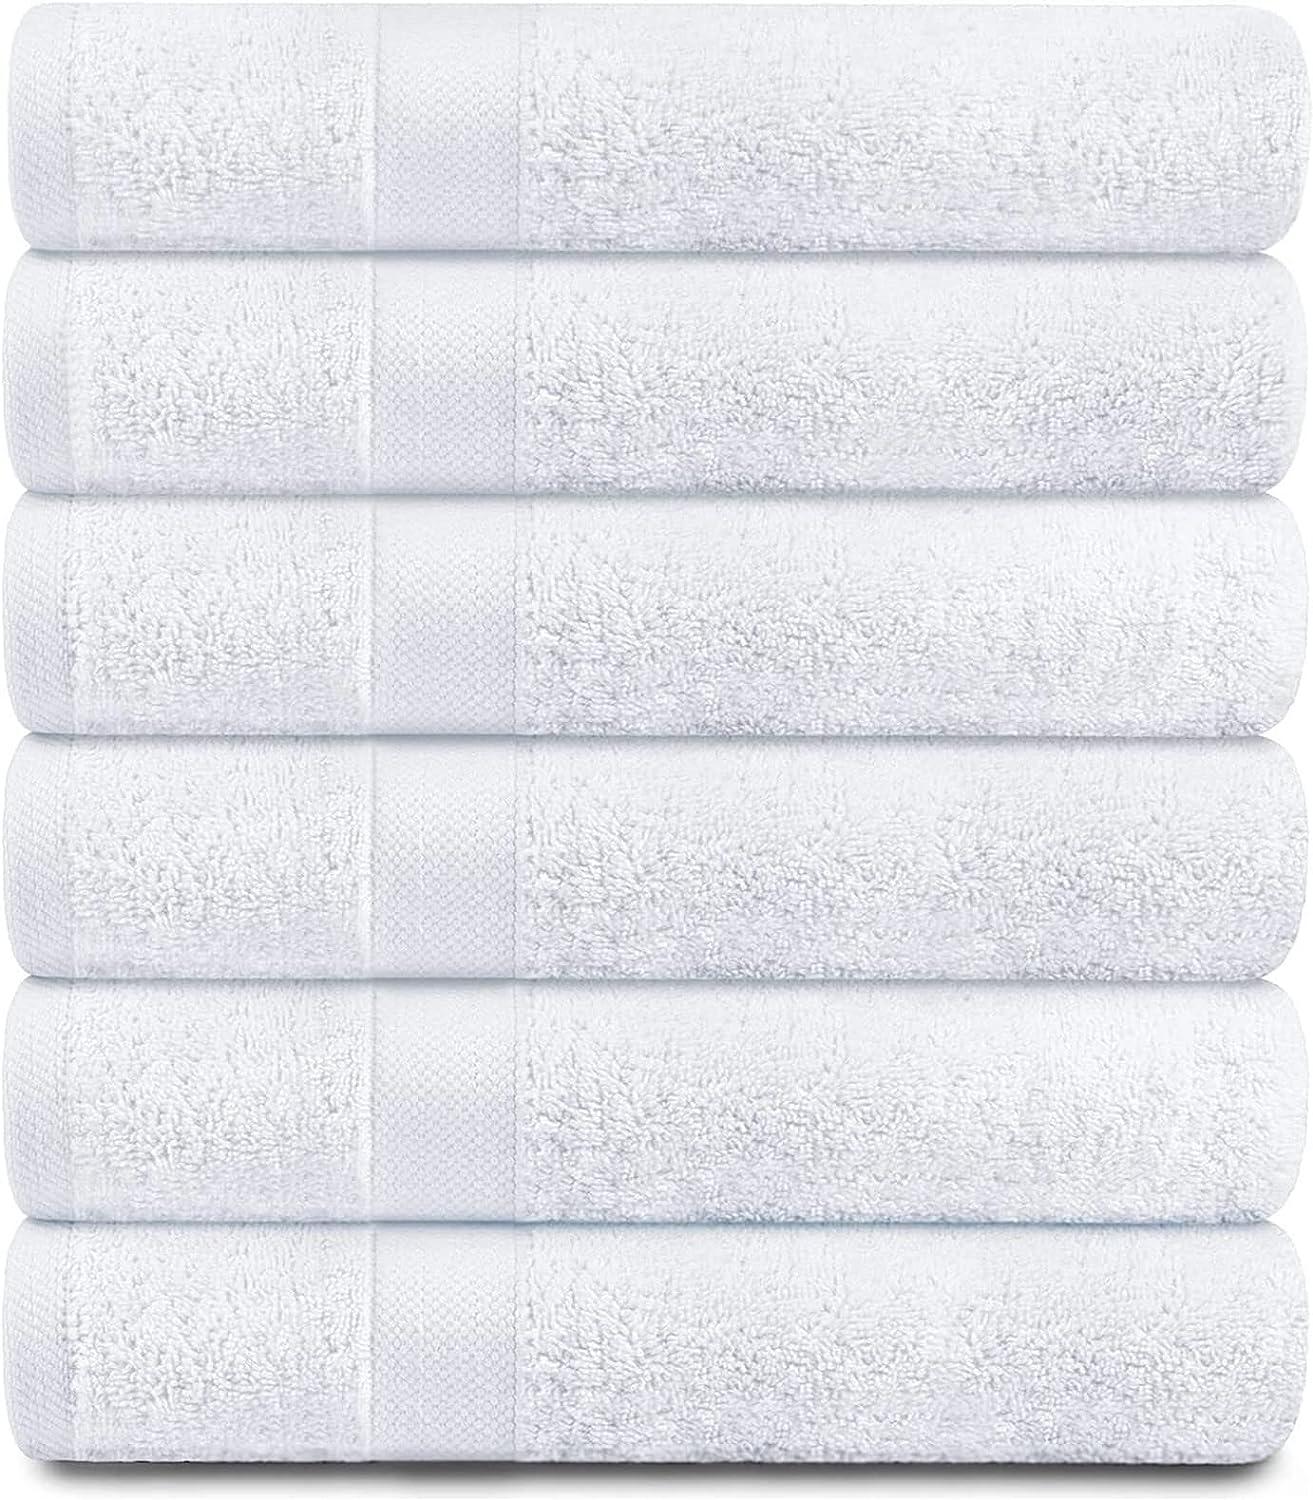 White Classic Luxury White Bath Towels Extra Large | 100% Soft Cotton 700  GSM Thick 2Ply Absorbent Quick Dry Hotel Bathroom Towel for Home, Gym, Pool